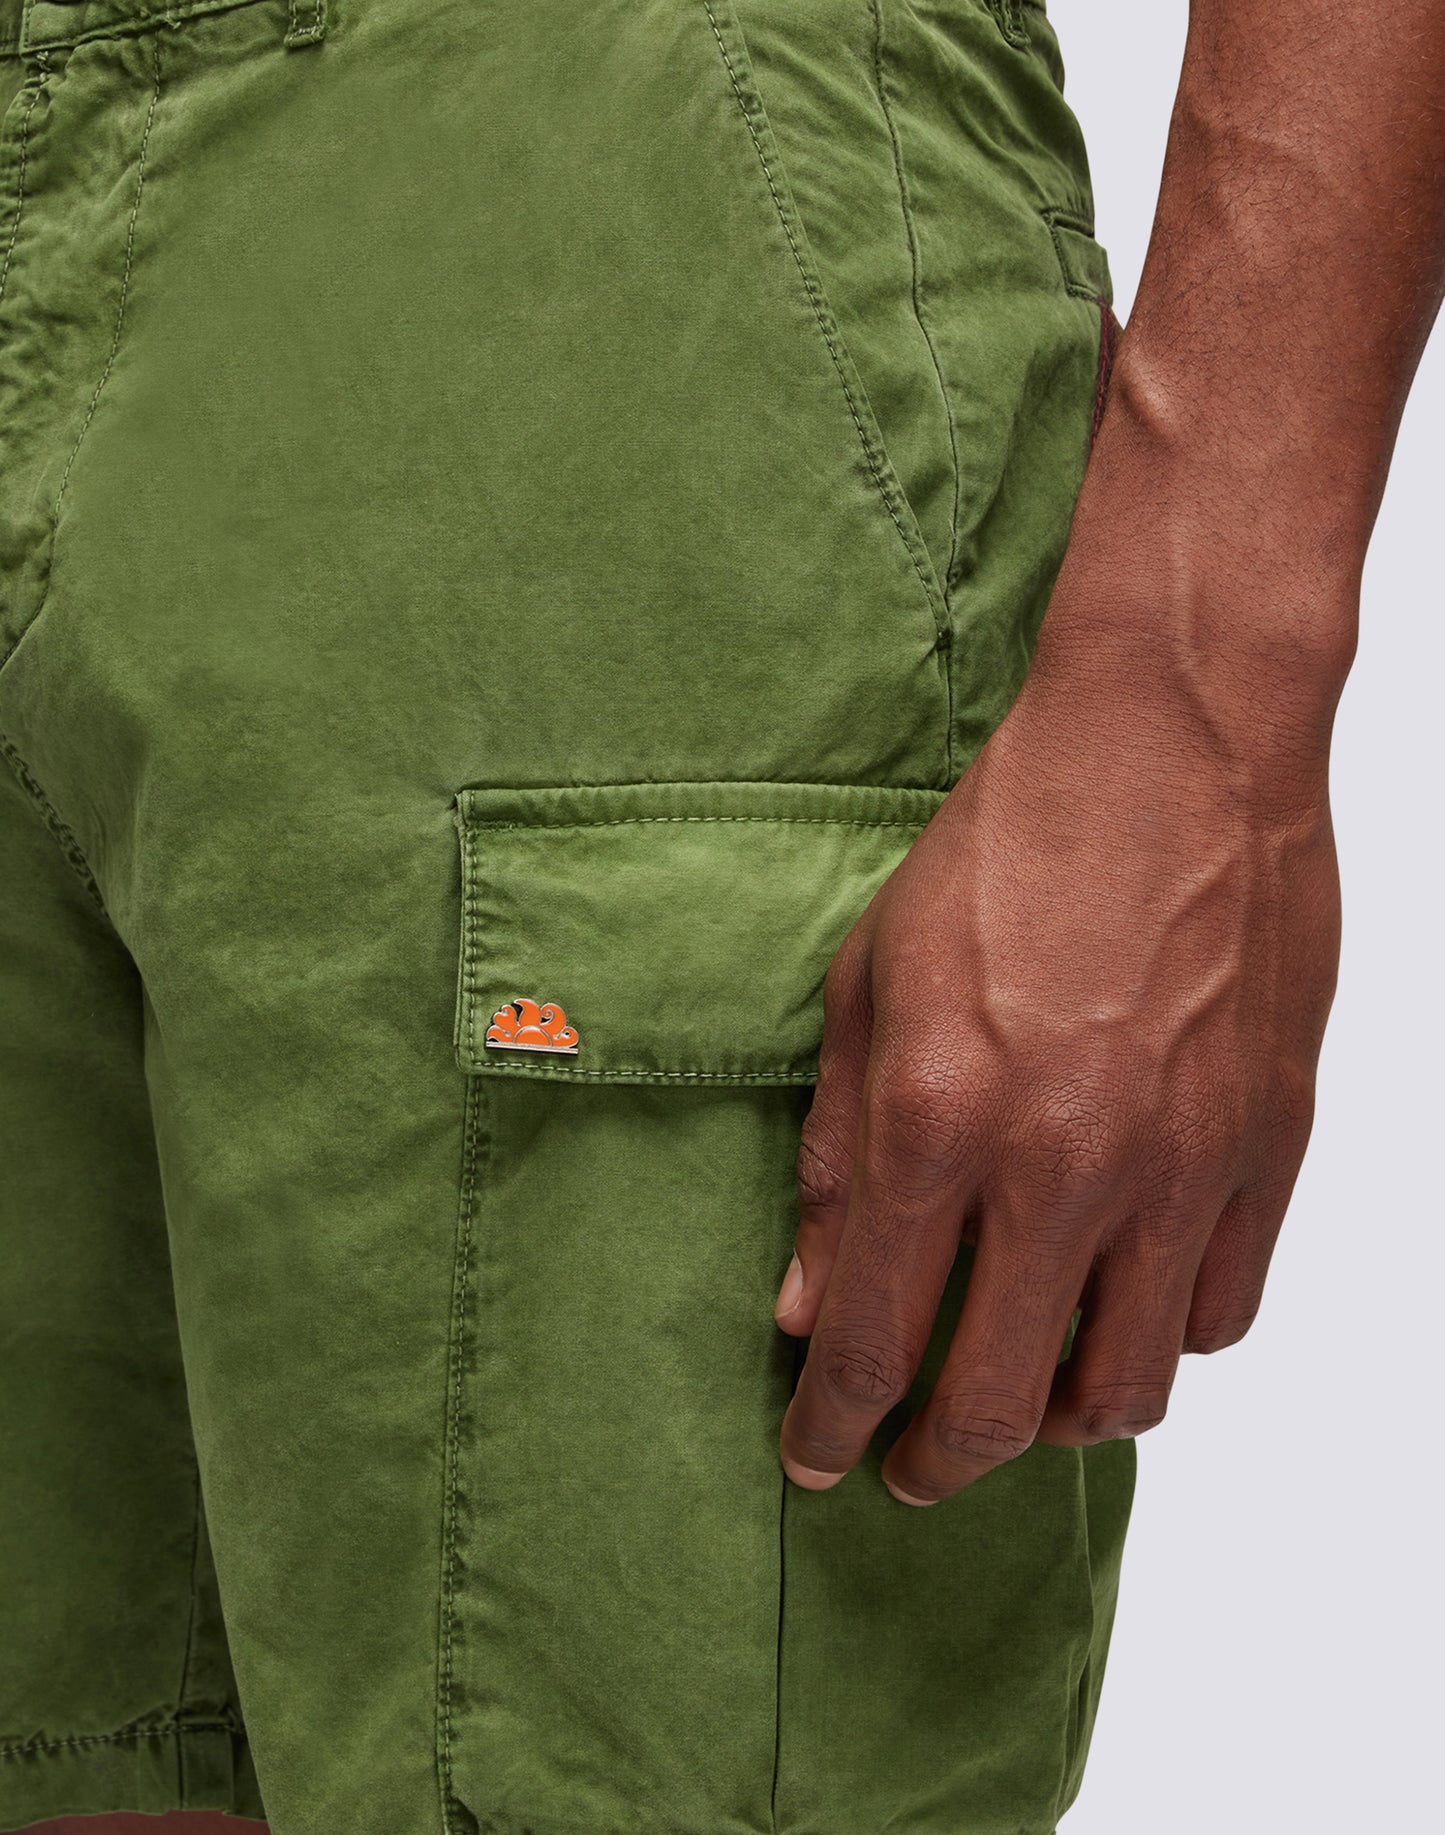 CARGO SHORTS IN GARMENT-DYED FABRIC WITH RAINBOW